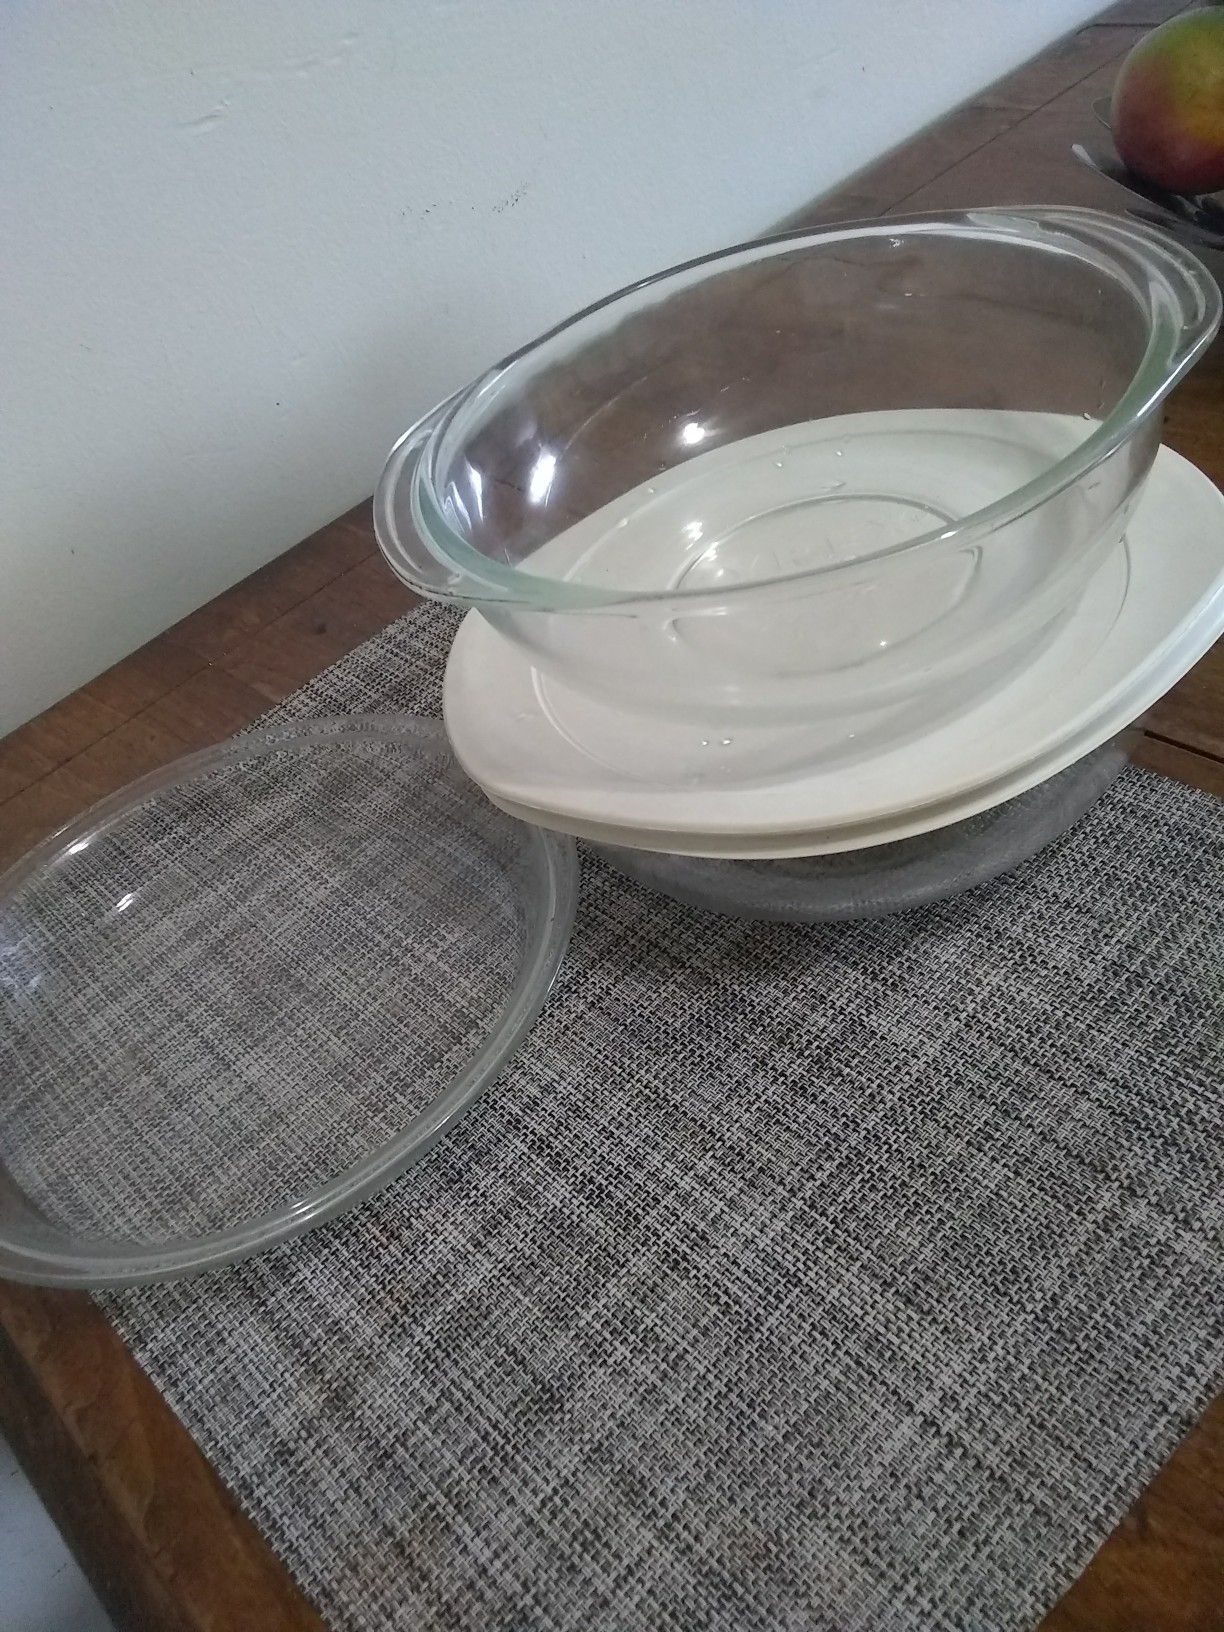 Pyrex all for $10